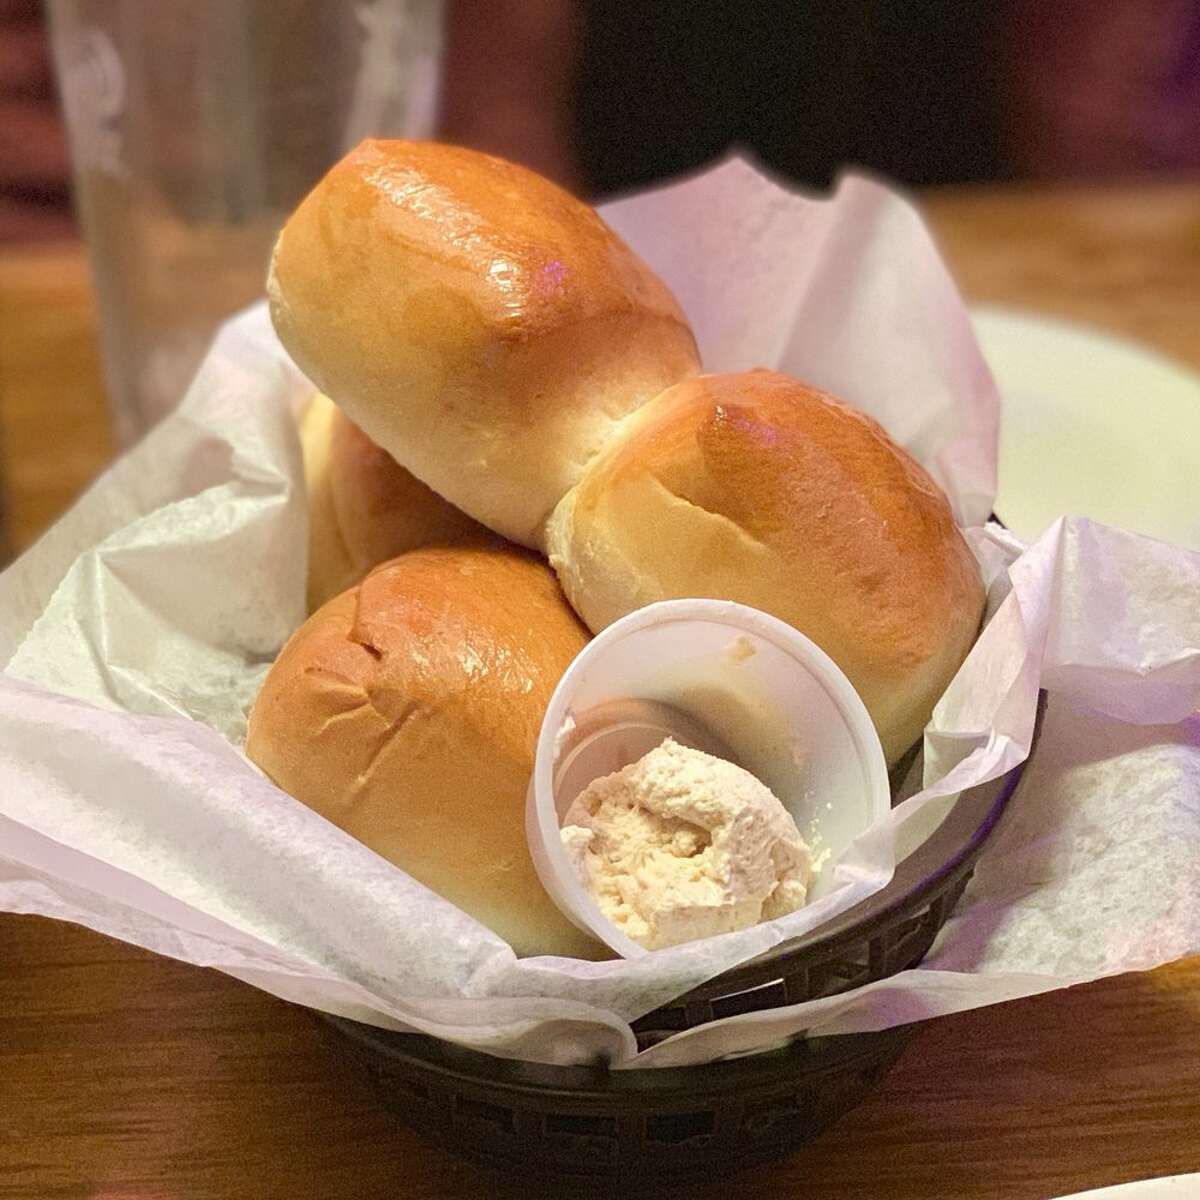 TEXAS ROADHOUSE: Paired with the Kentucky-based chain’s signature cinnamon butter, these sweet rolls might spoil your dinner if you eat too many (just save some room for free peanuts, too).